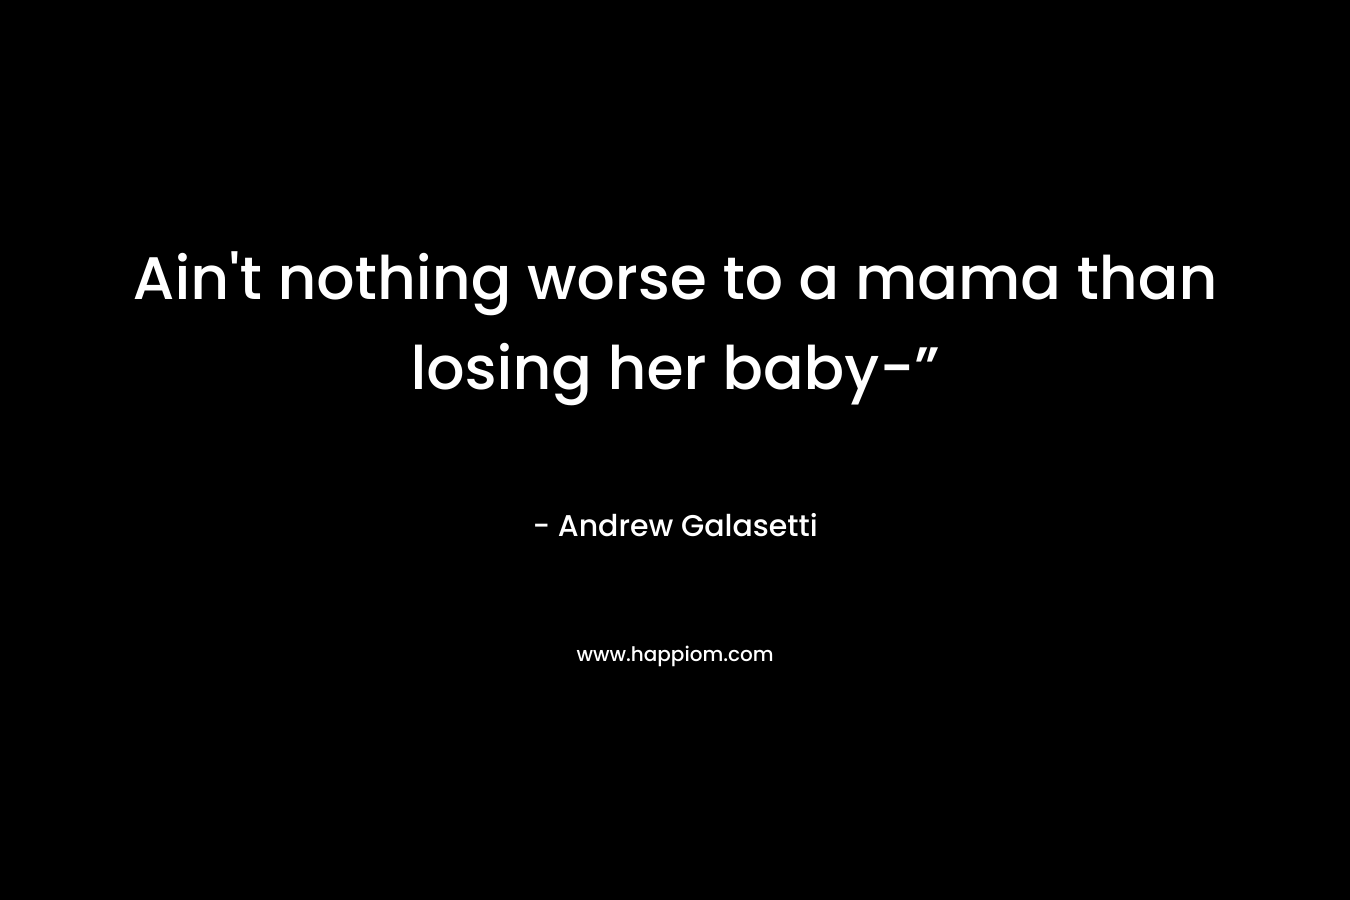 Ain't nothing worse to a mama than losing her baby-”